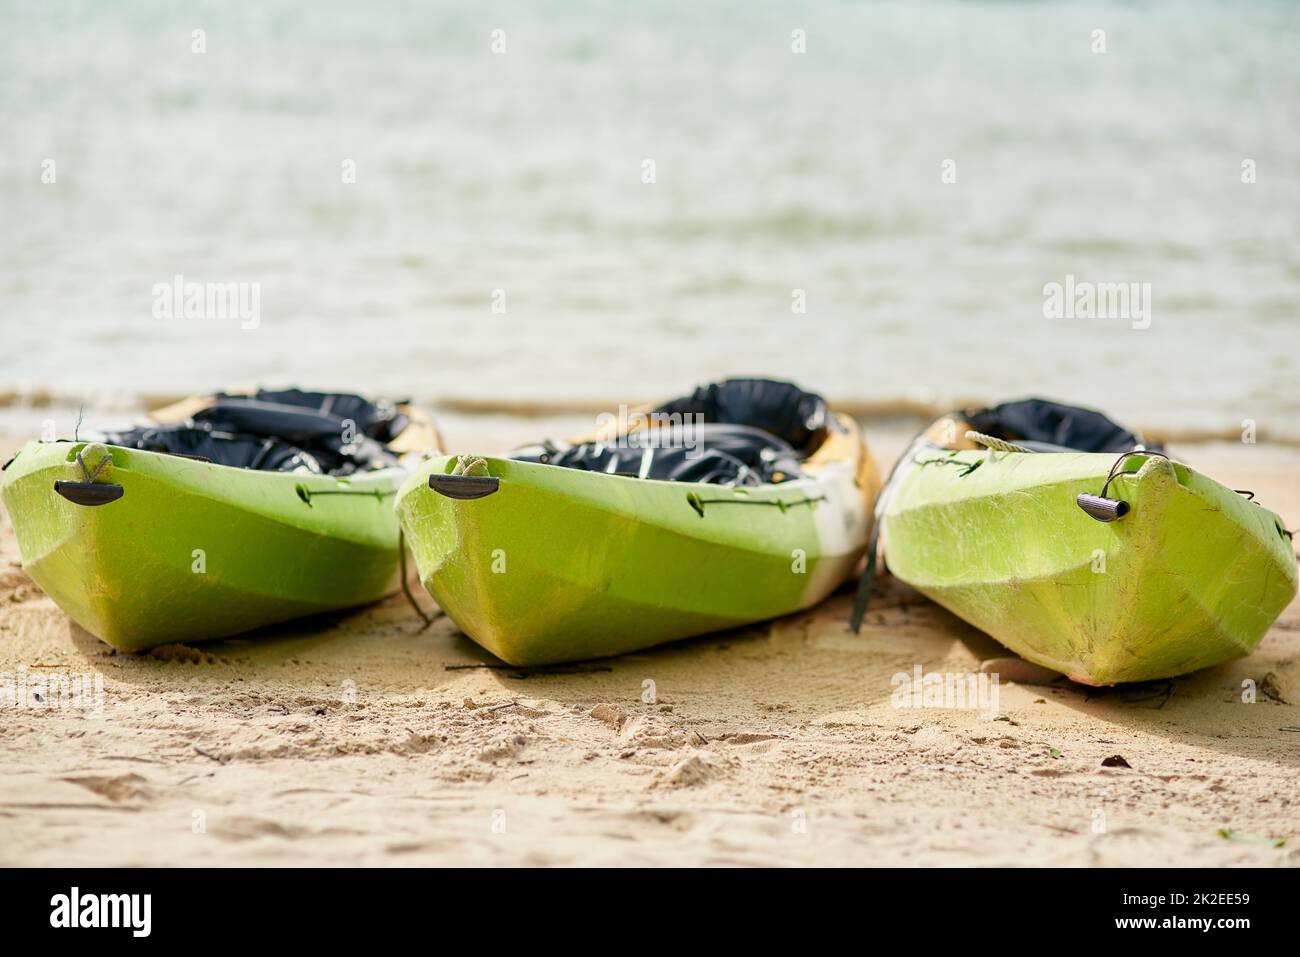 Ready to ride the waves. Still life shot of three canoes on the shore of the beach. Stock Photo